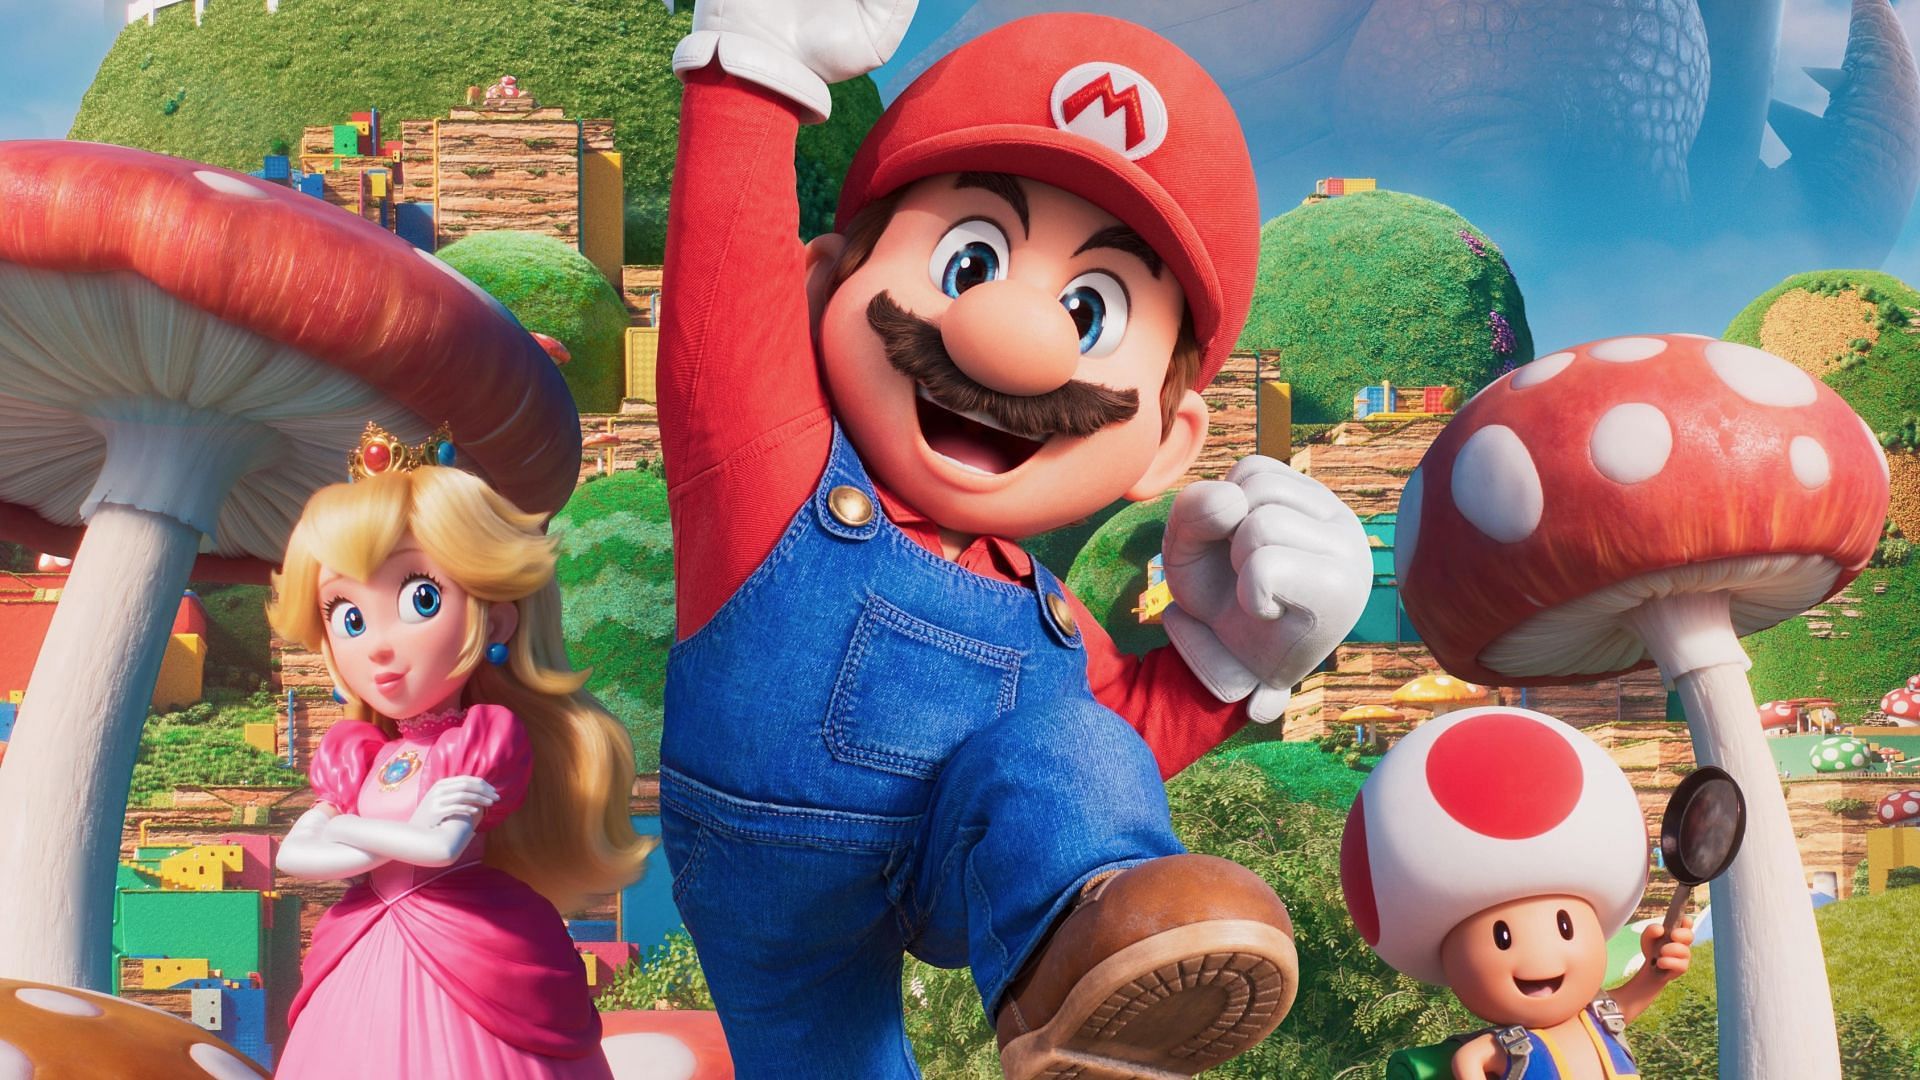 Super Mario Bros. Release date, poster, streaming platforms and more